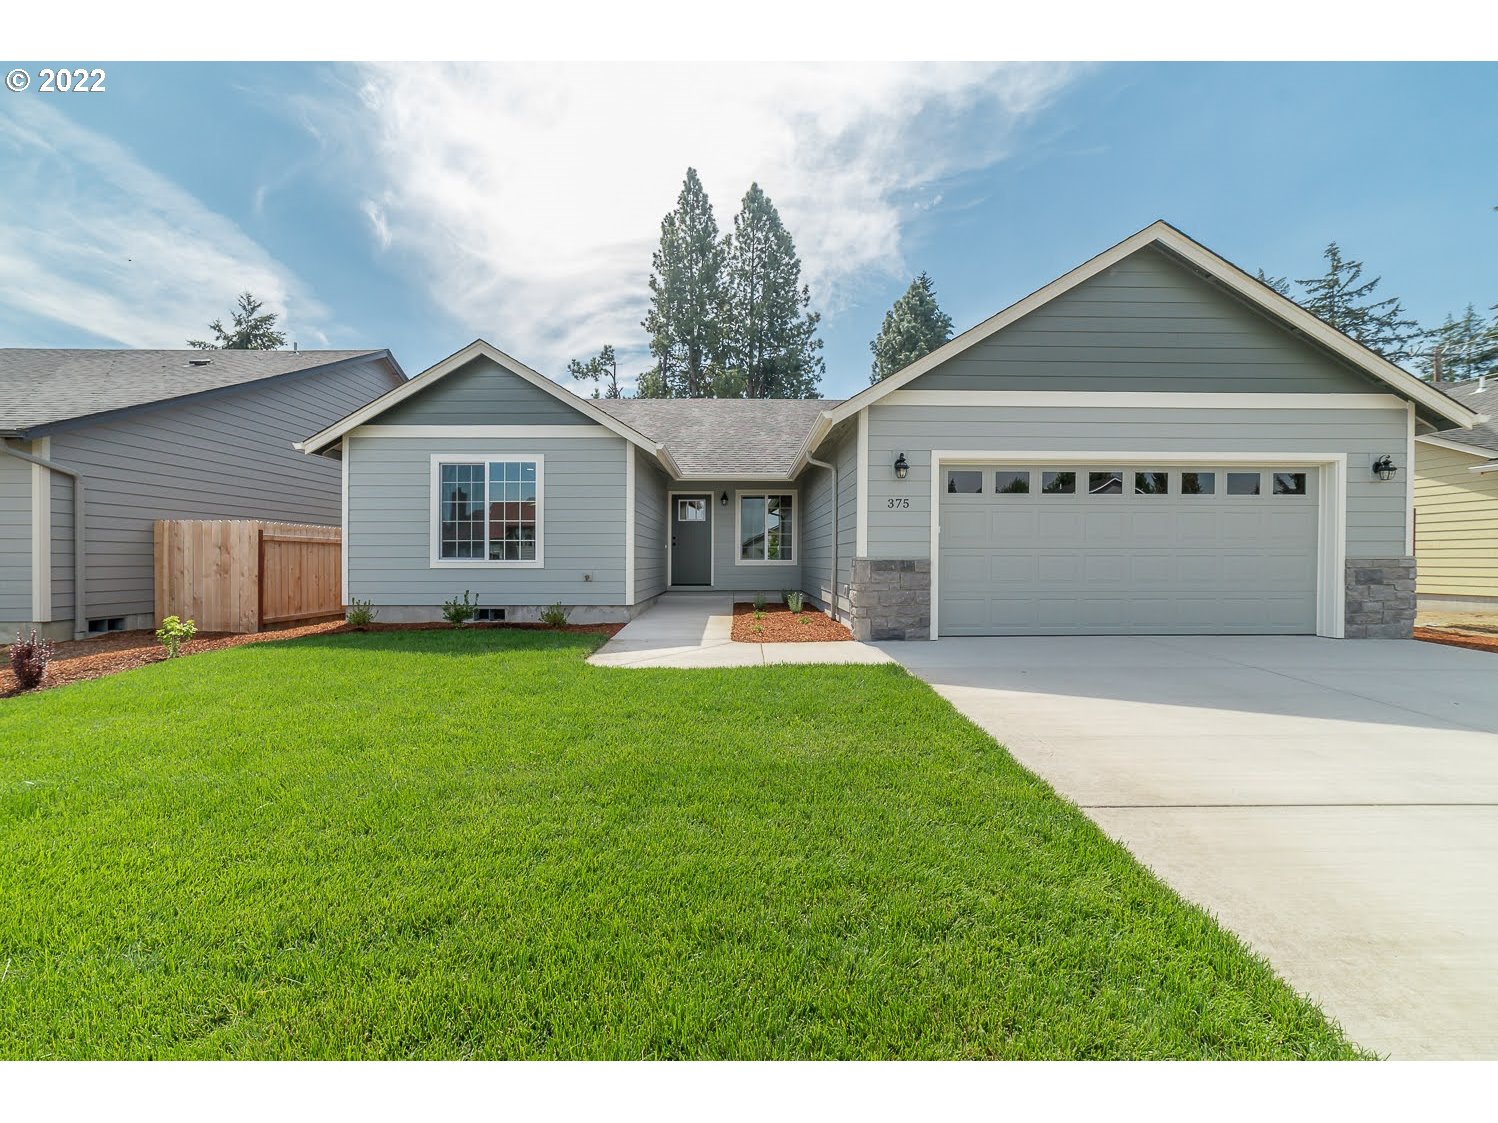 375 OWENS WAY, Creswell, OR 97426